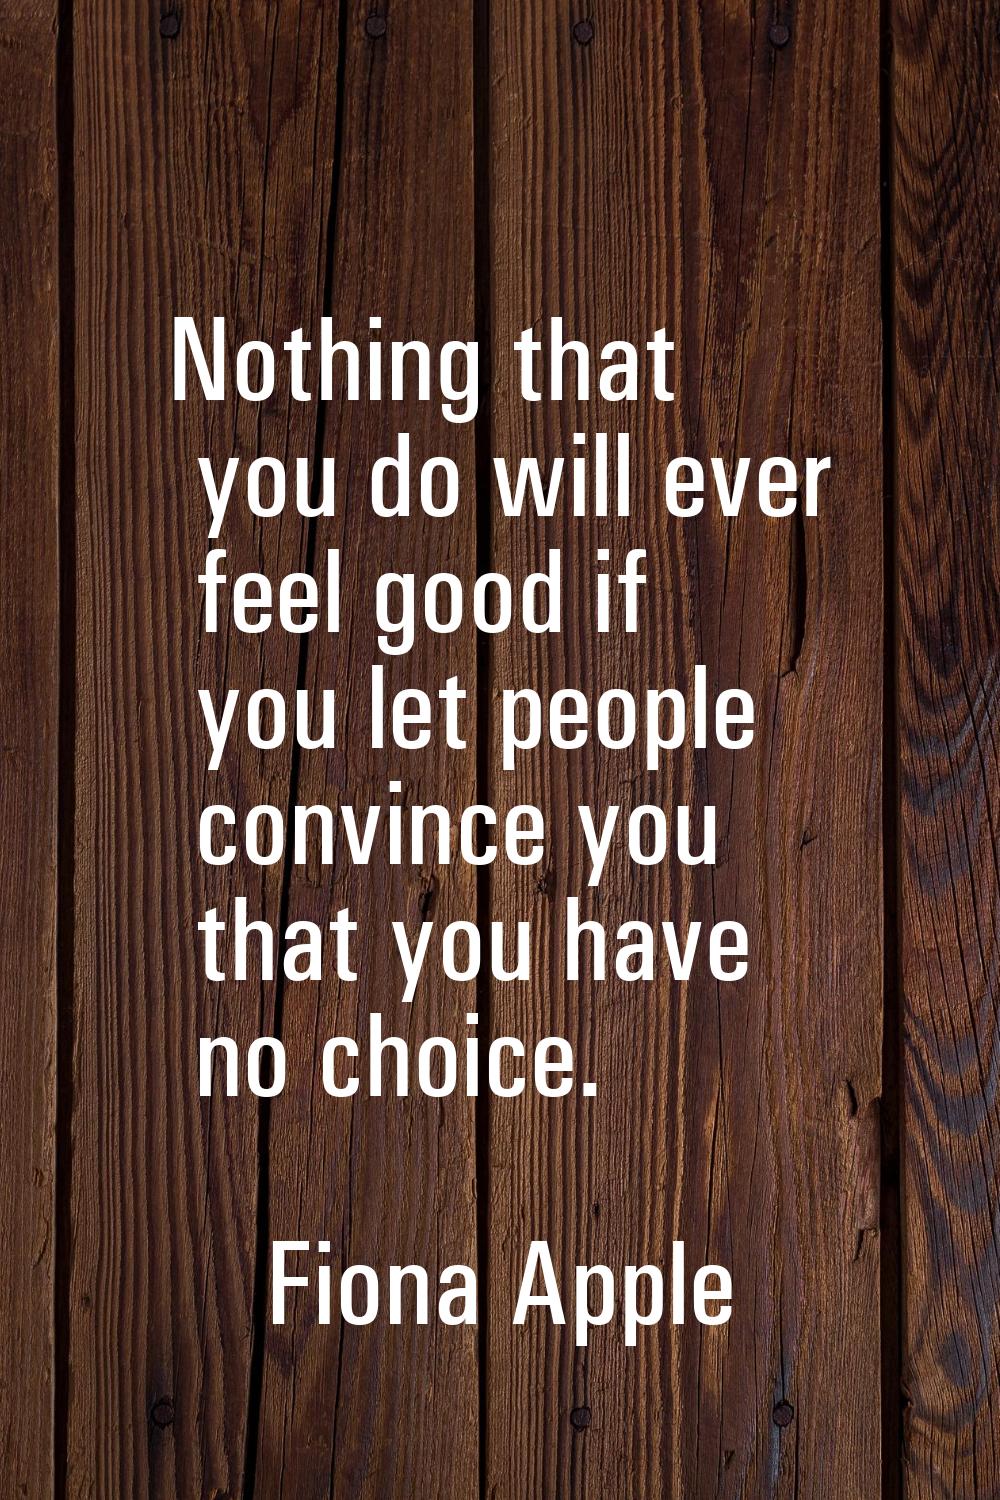 Nothing that you do will ever feel good if you let people convince you that you have no choice.